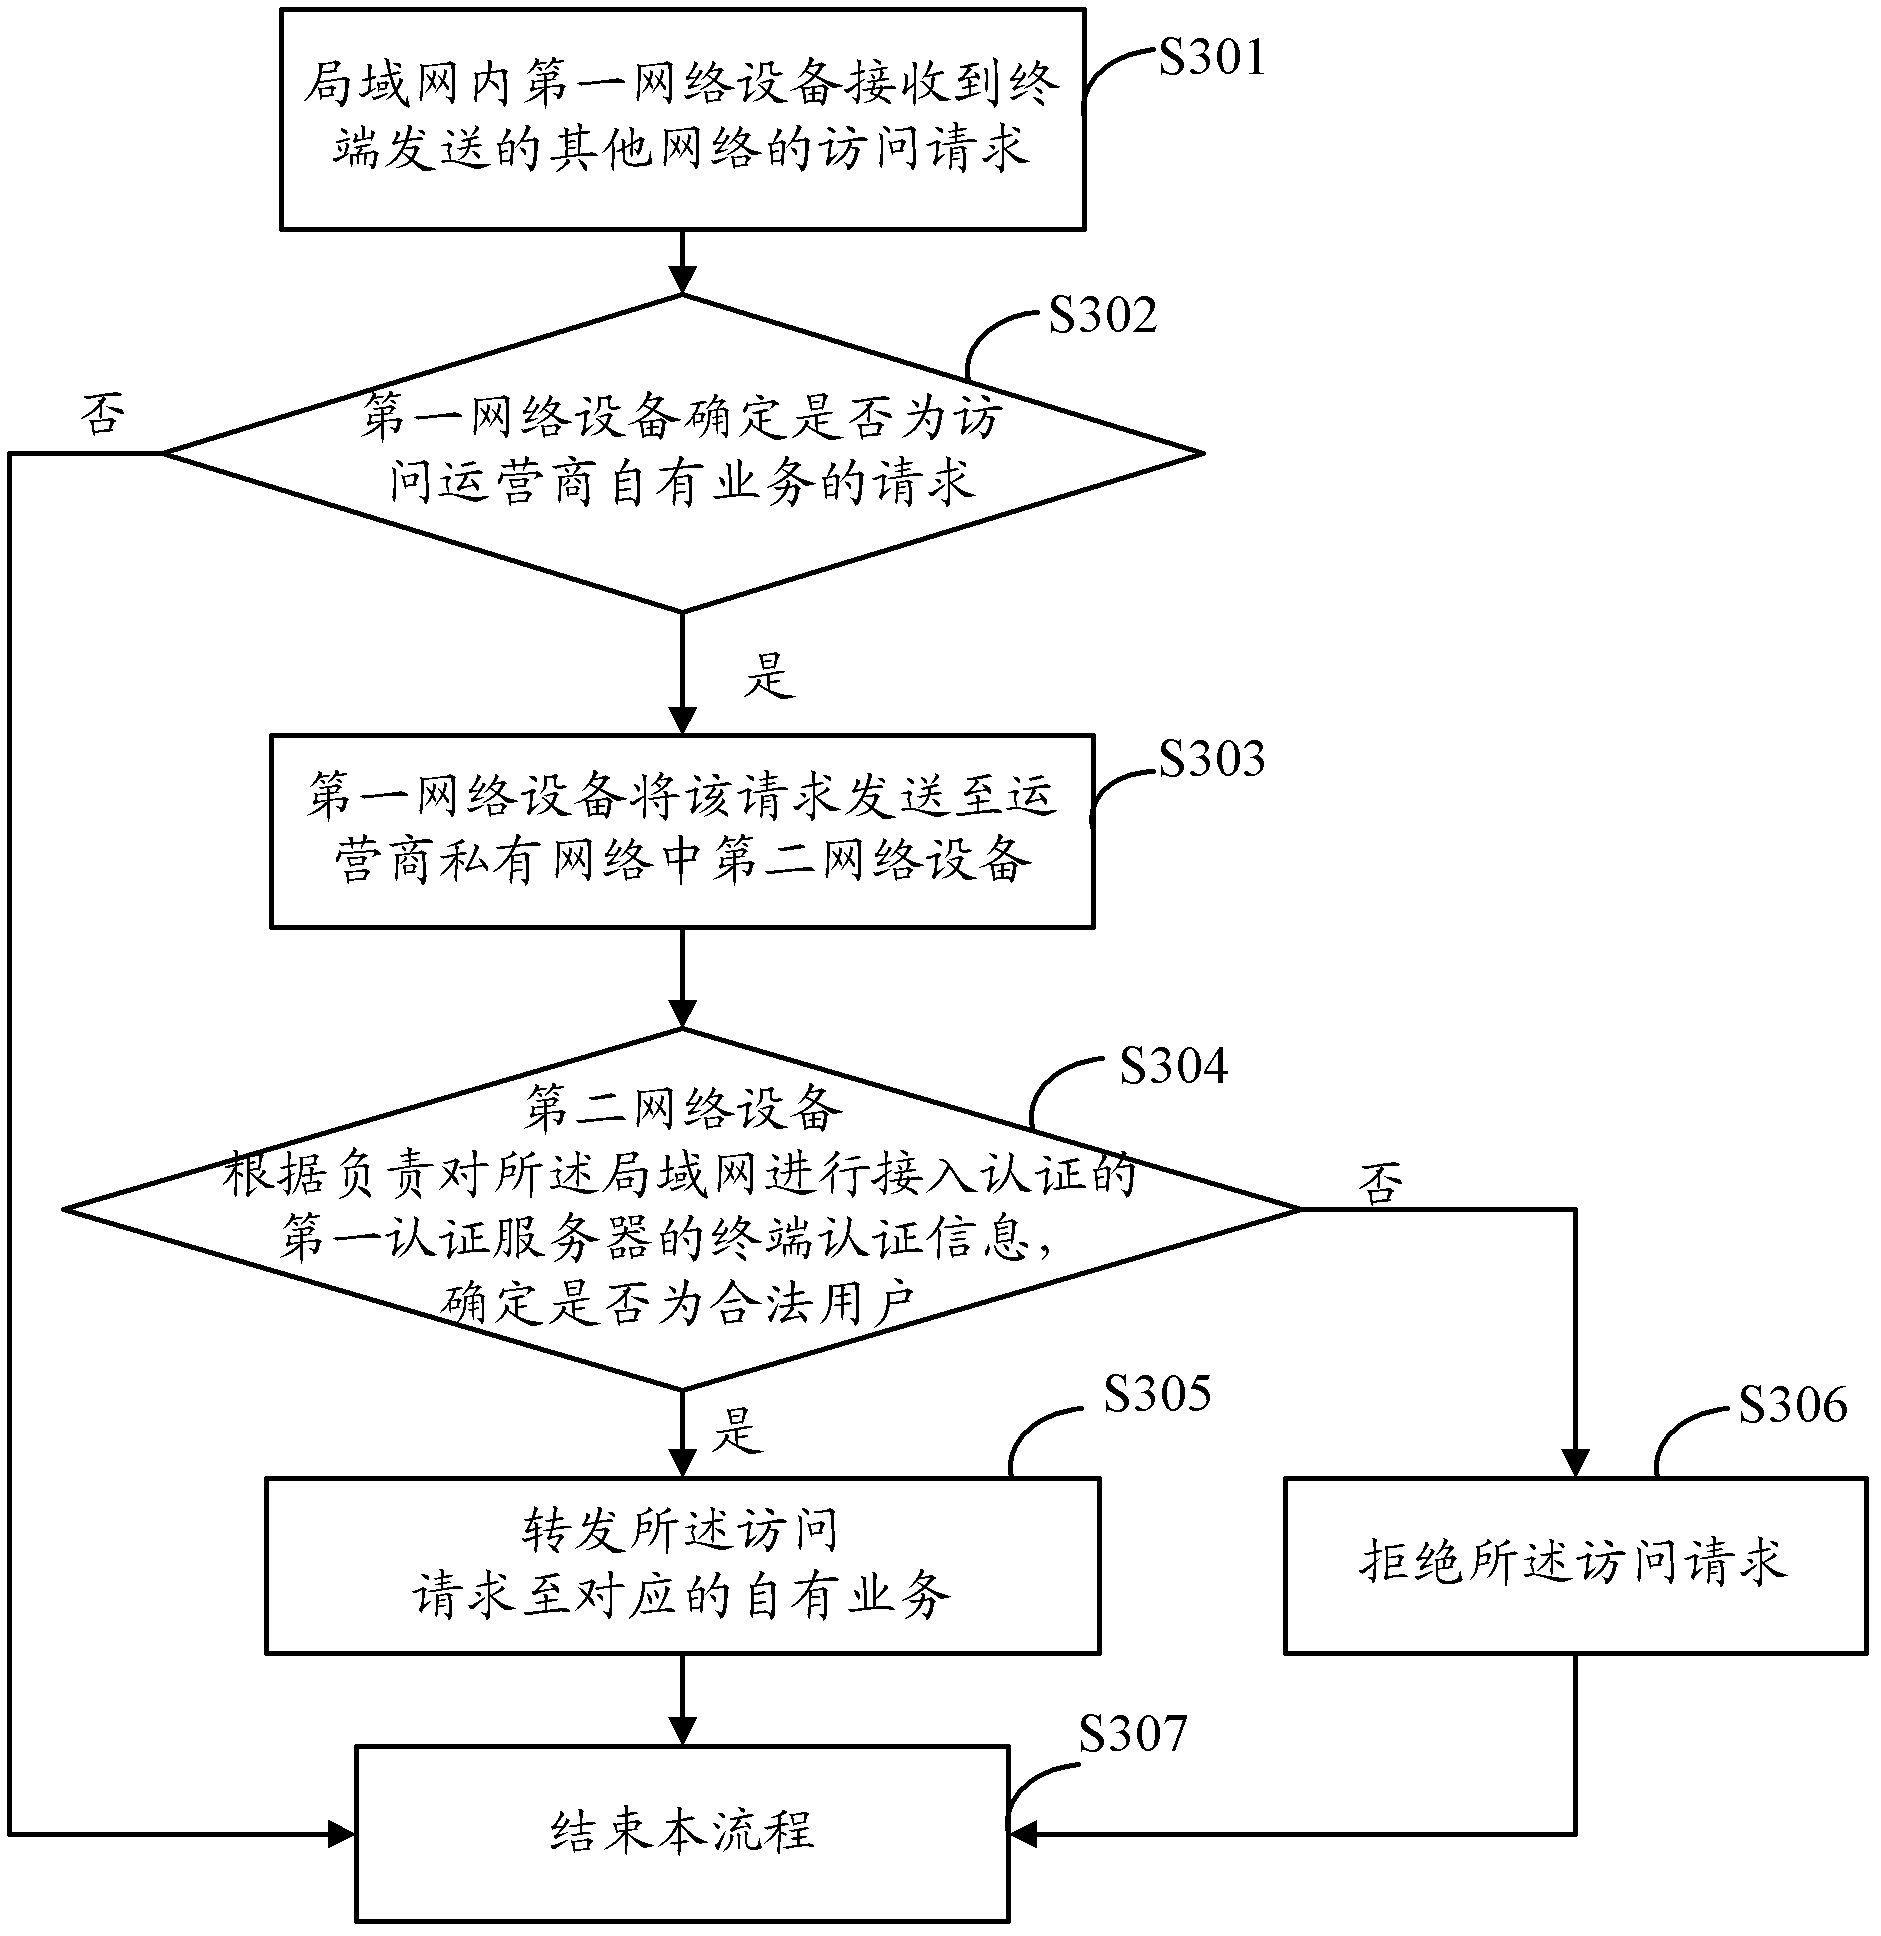 Method, equipment and system for accessing private services of operator